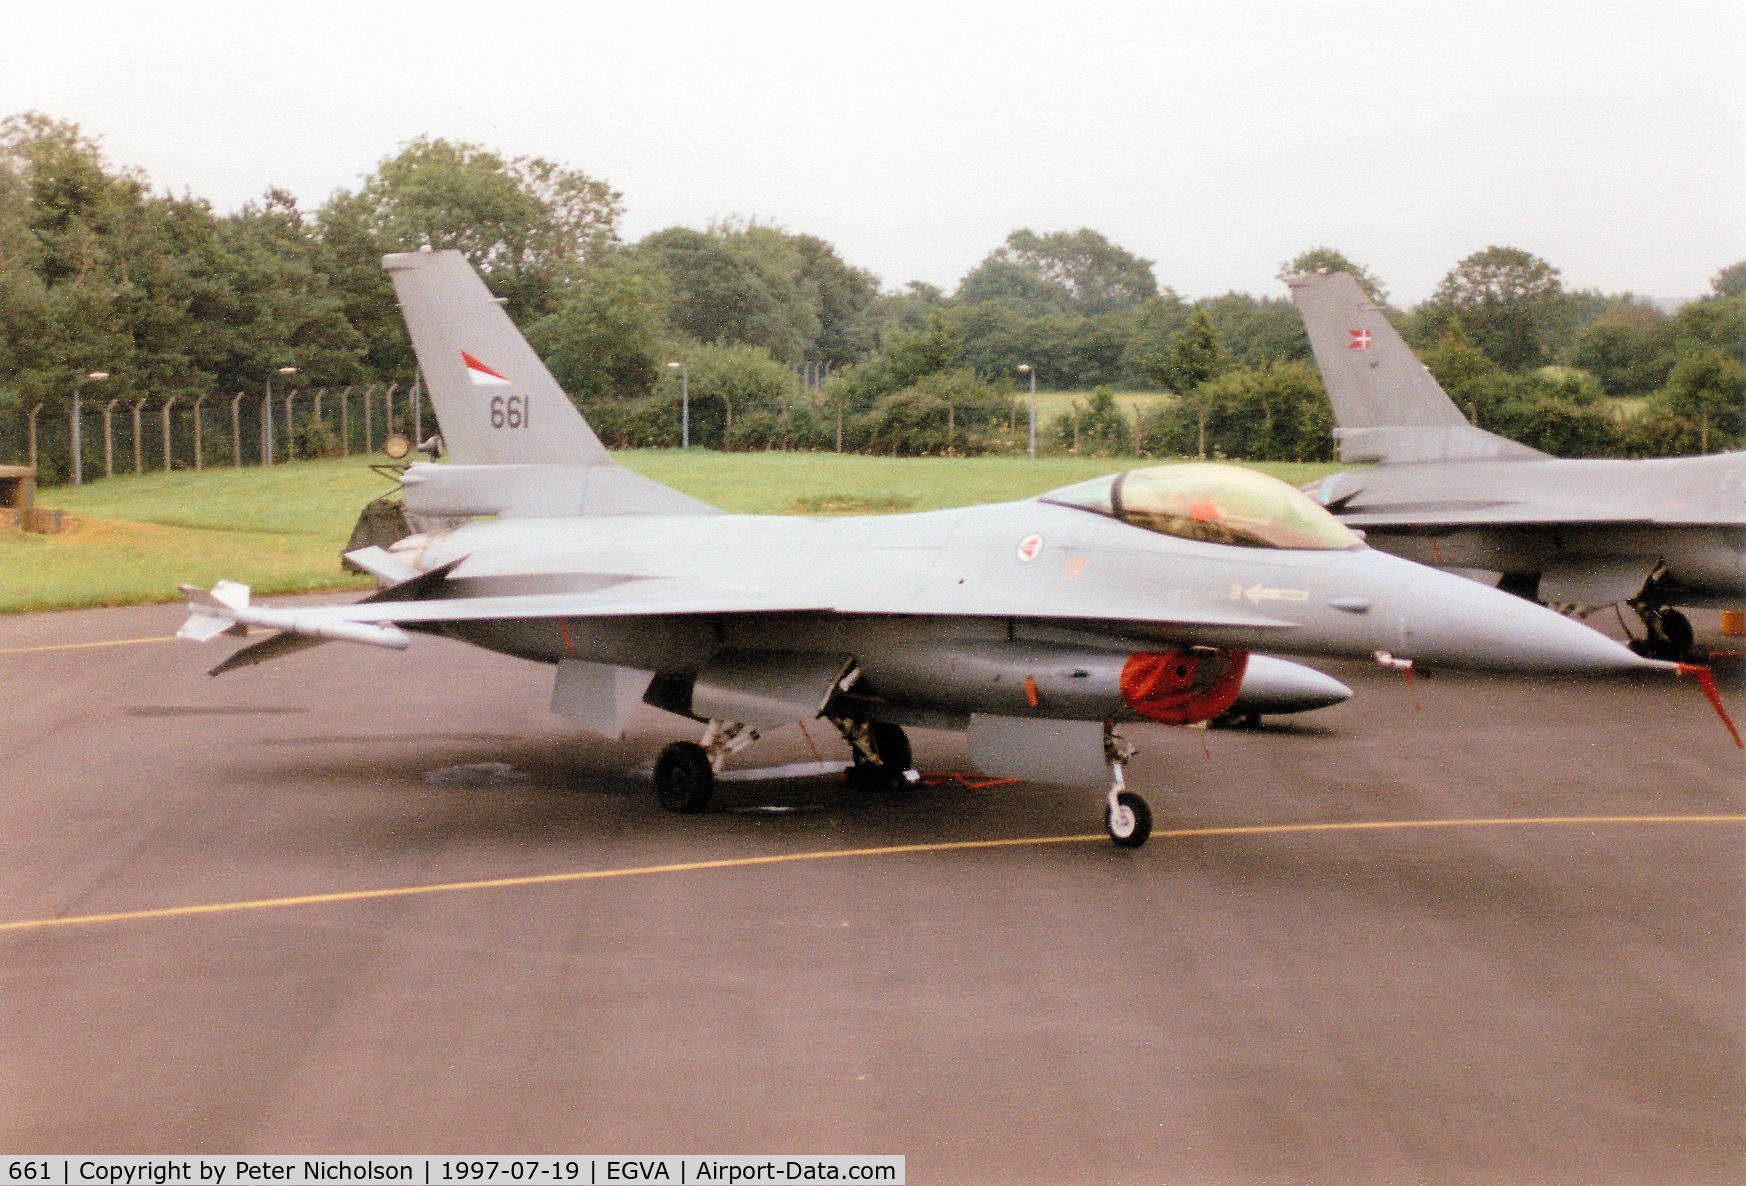 661, 1980 Fokker F-16AM Fighting Falcon C/N 6K-33, F-16A Falcon, callsign Norwegian 5087 Alpha, of 334 Skv Royal Norwegian Air Force on the flight-line at the 1997 Intnl Air Tattoo at RAF Fairford.